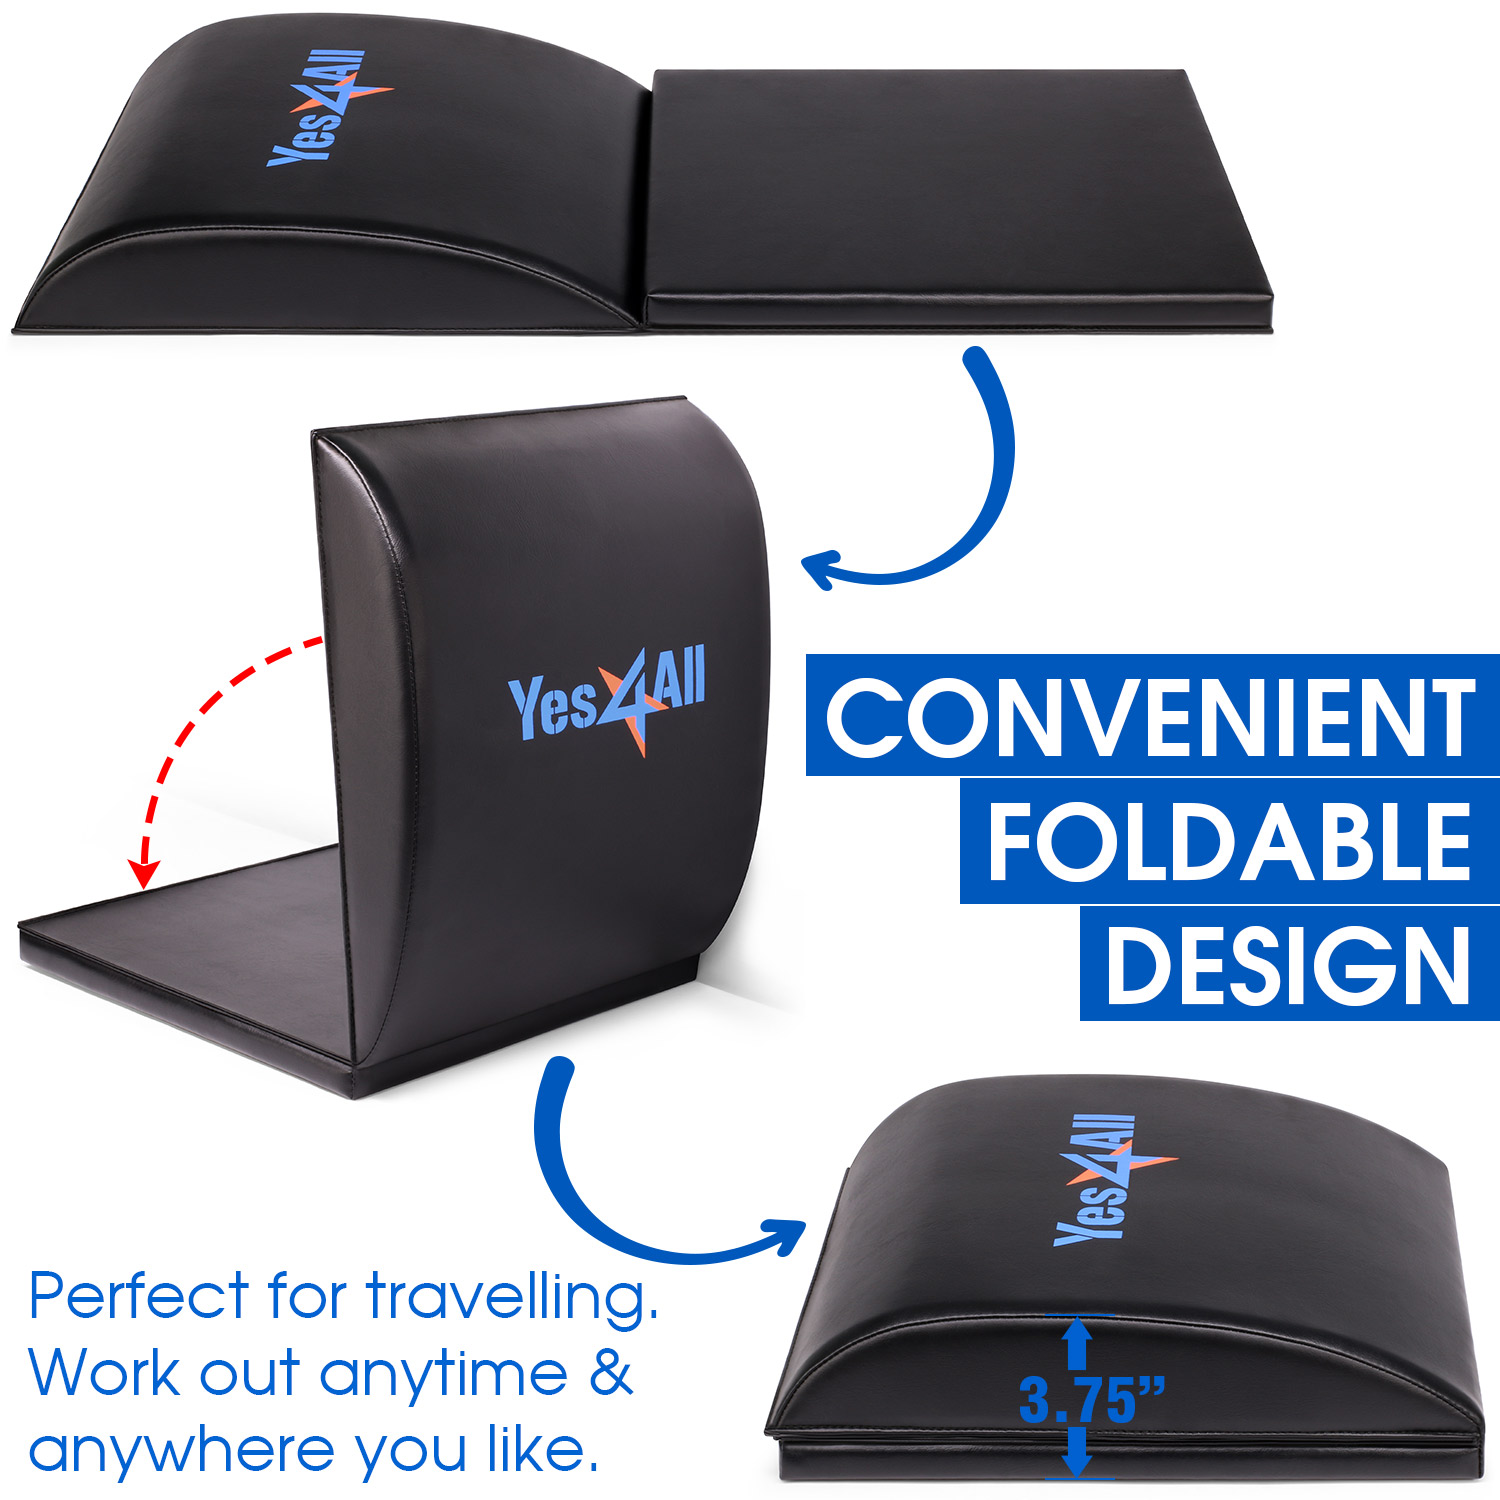 Yes4All Ab Exercise Mat with Tailbone Protecting Pad for Abs Workouts (Black) - image 4 of 5